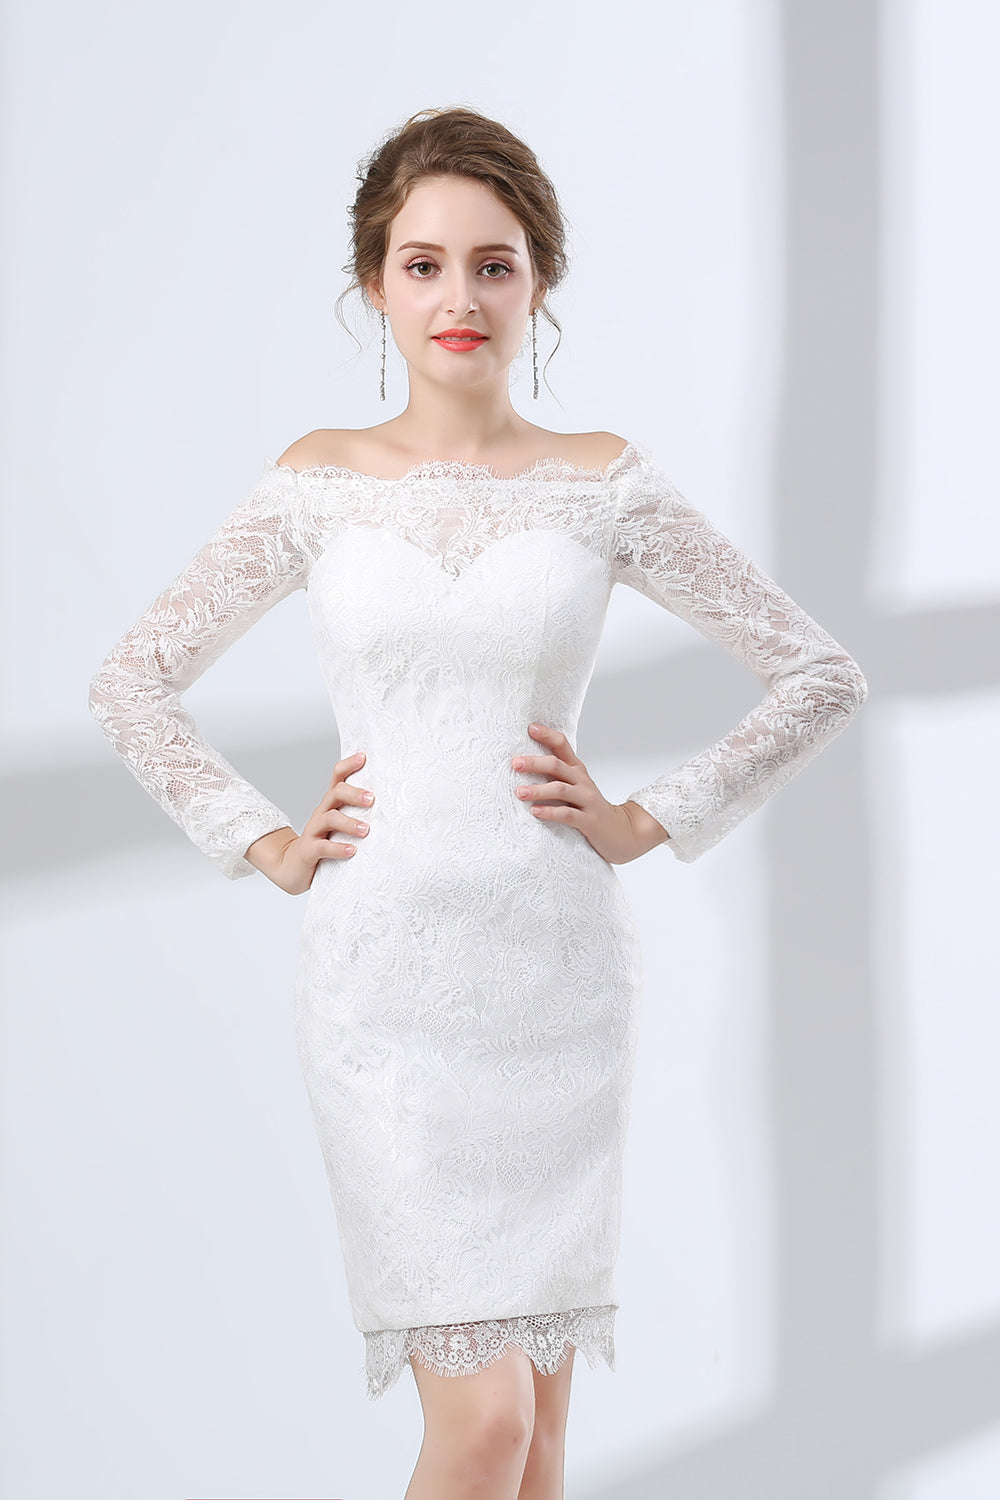 Evening Dress Stunning, Sheath White Lace Off The Shoulder Long Sleeve Prom Dresses